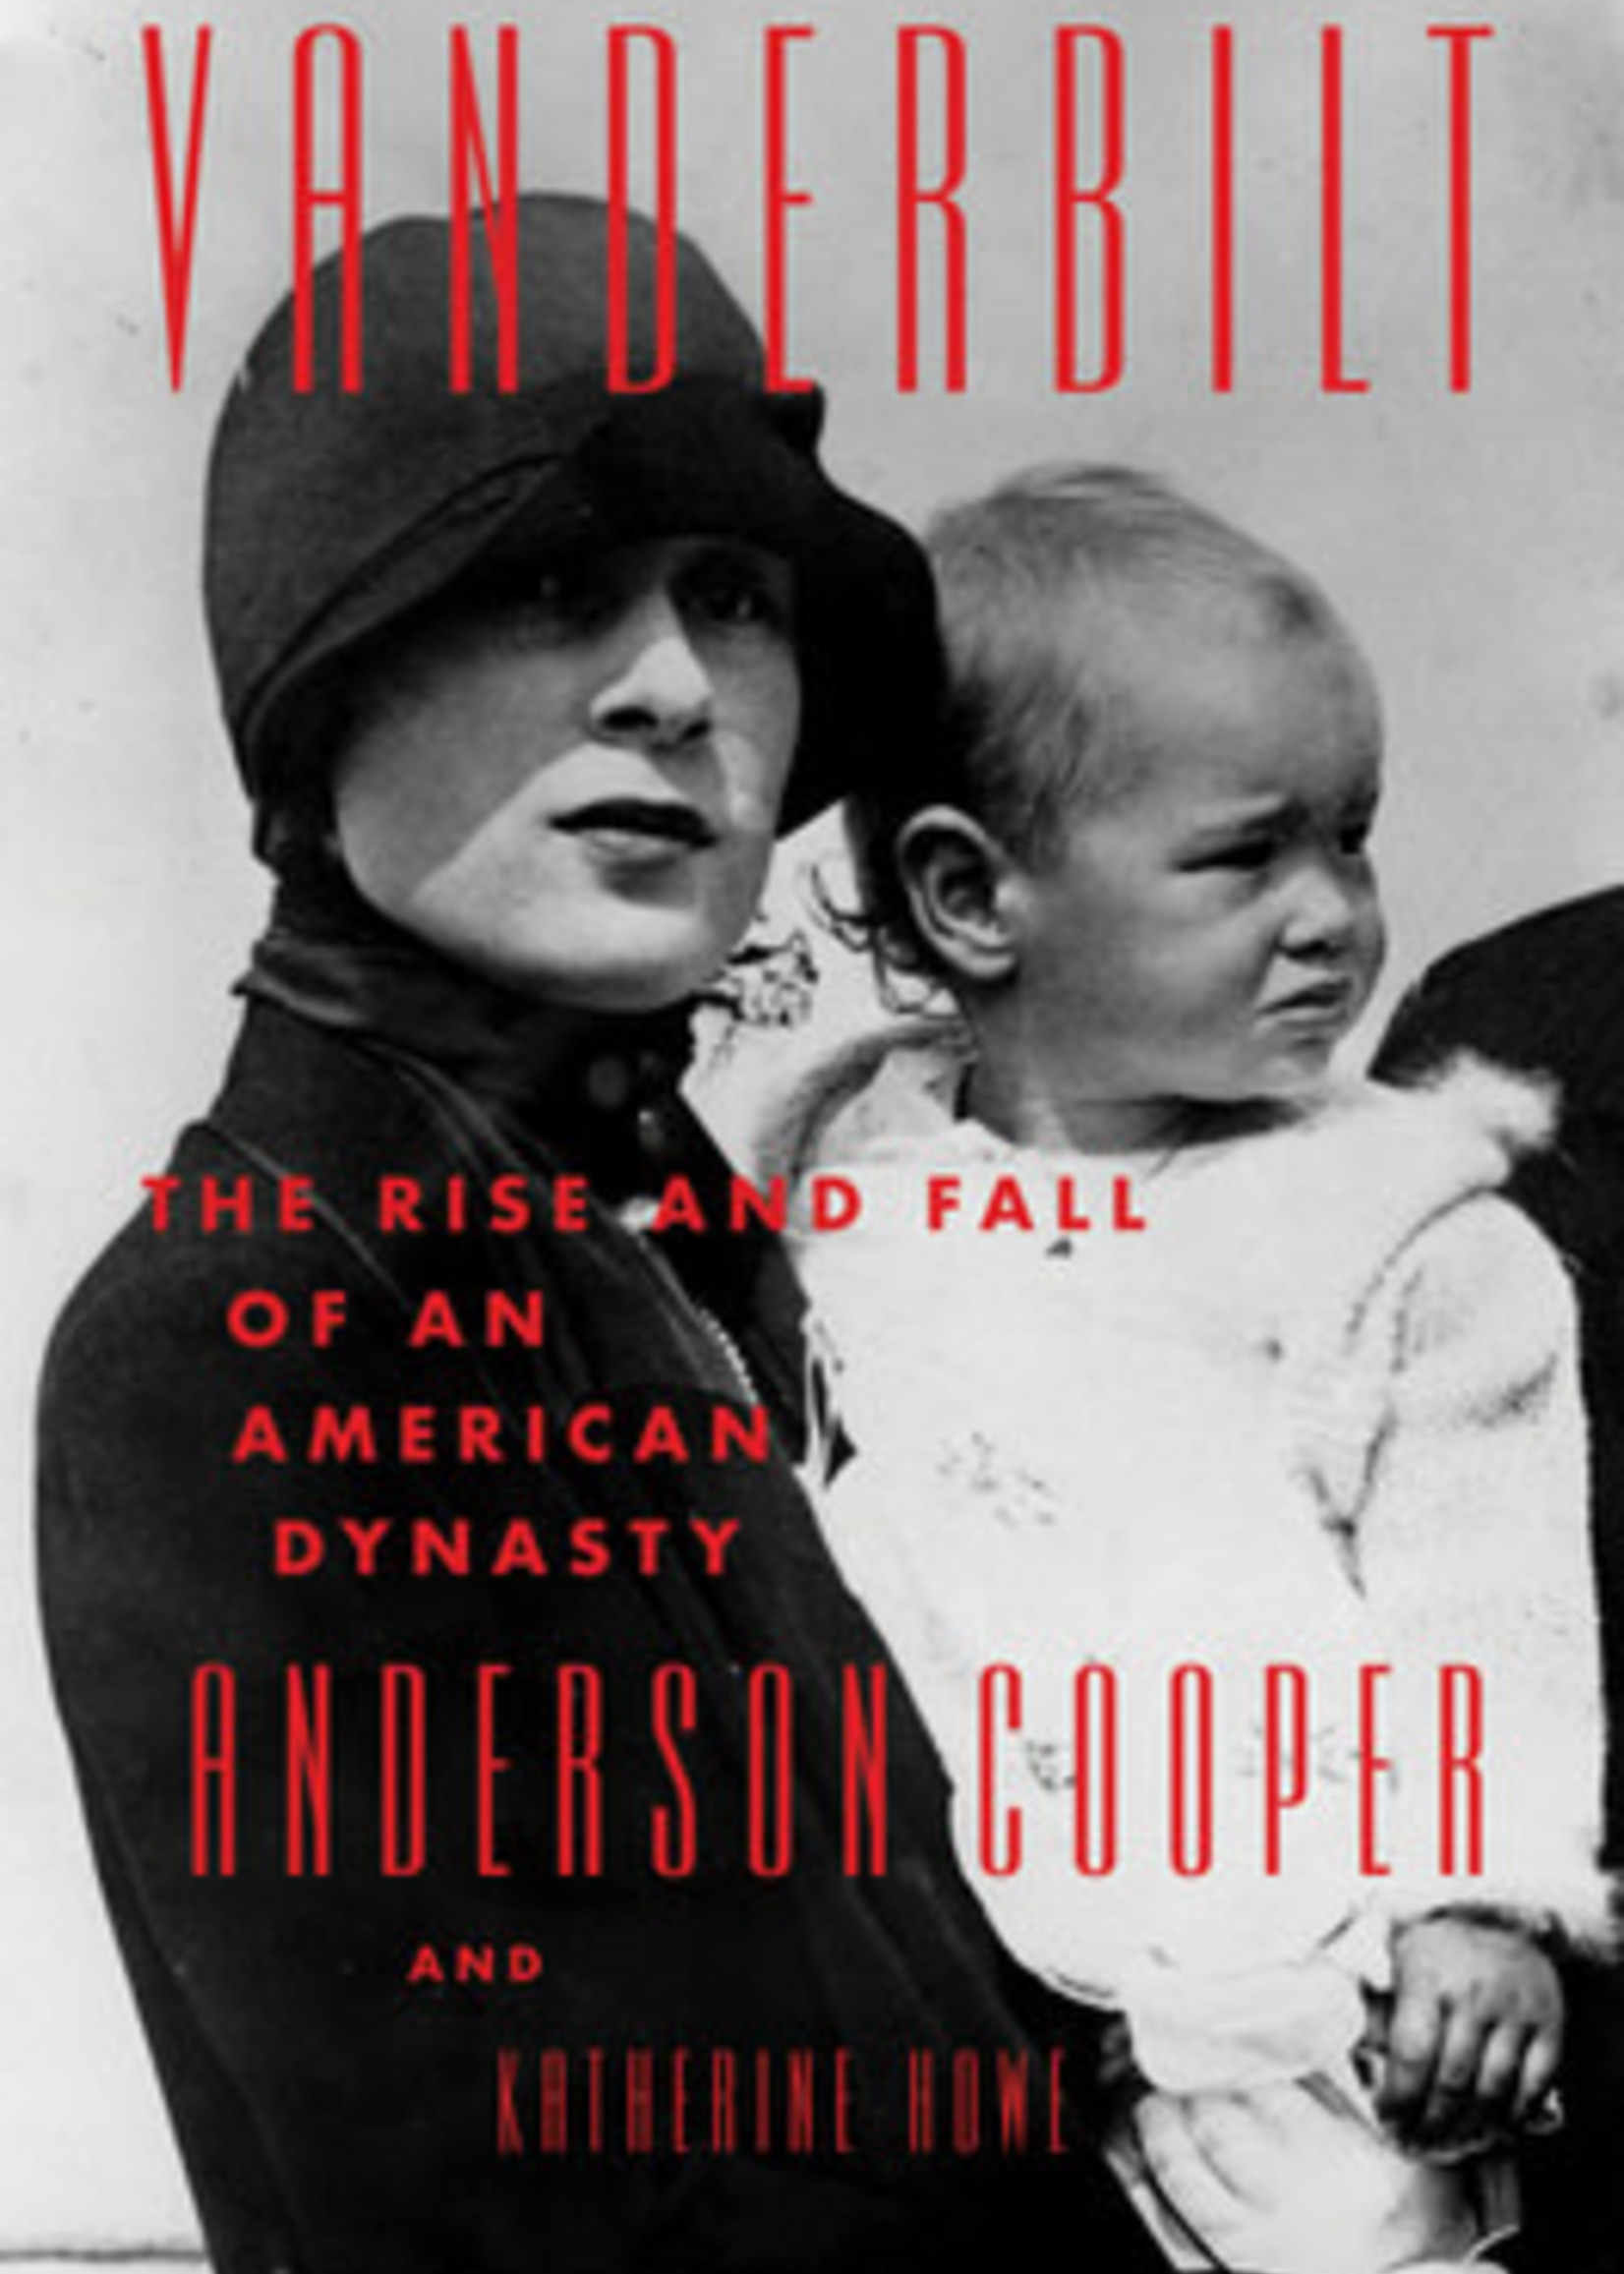 Vanderbilt: The Rise and Fall of an American Dynasty by Anderson Cooper, Katherine Howe